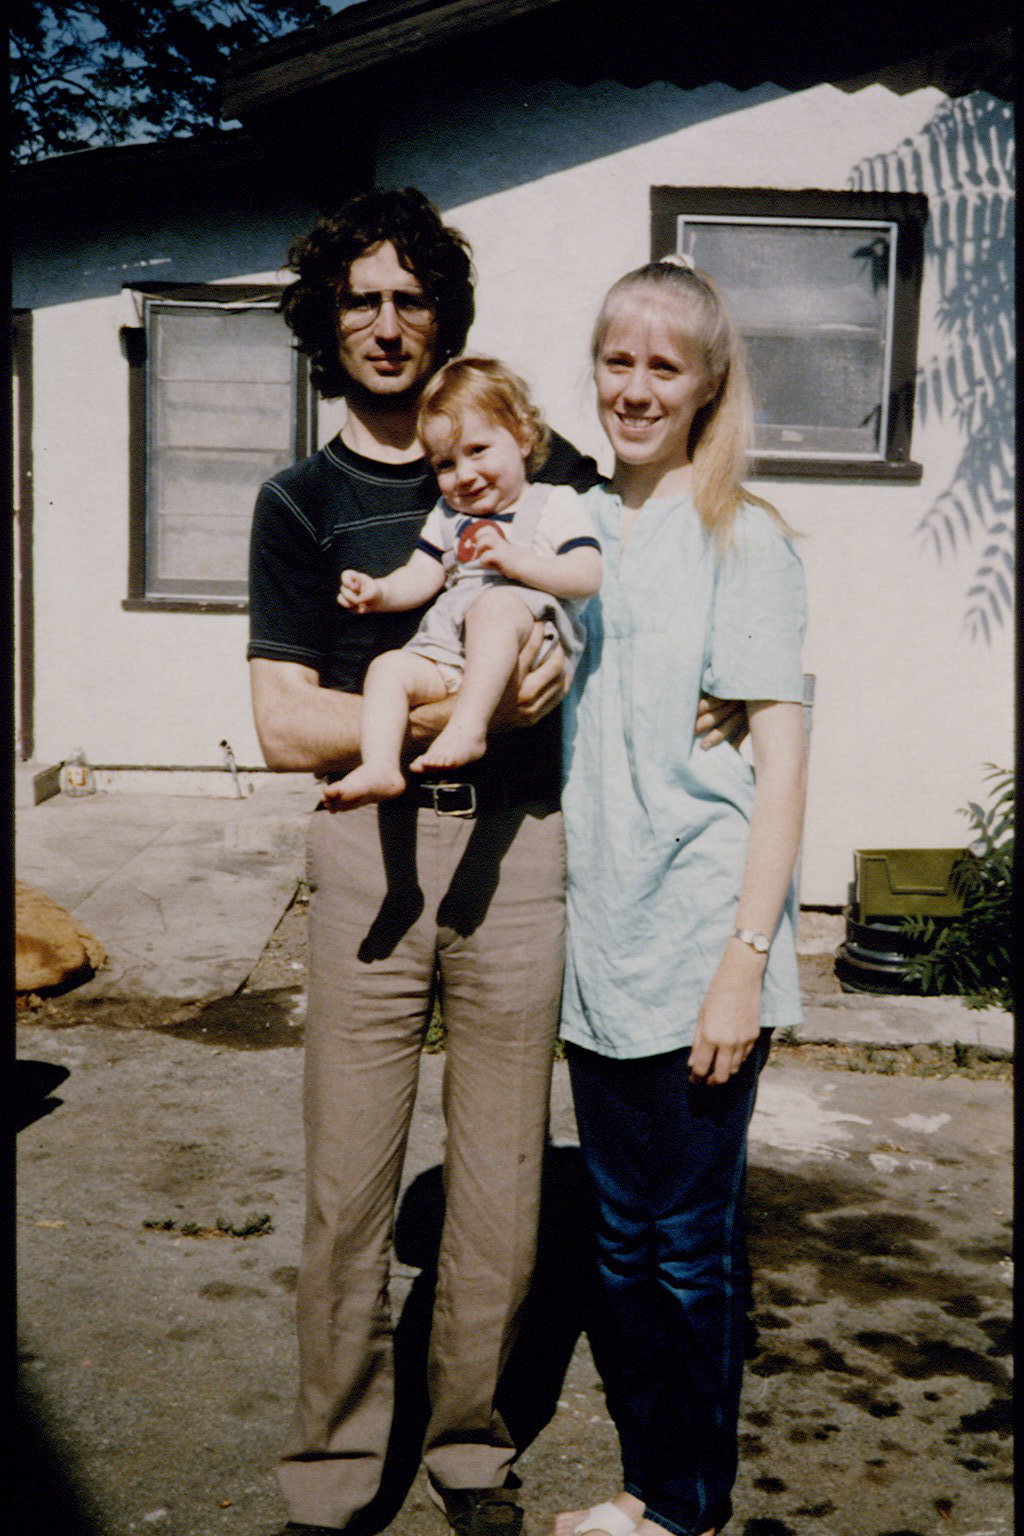 Vernon Wayne Howell, known as David Koresh, his wife Rachel, and their son Cyrus in front of their house (Elizabeth Baranyai/Sygma via Getty Images)